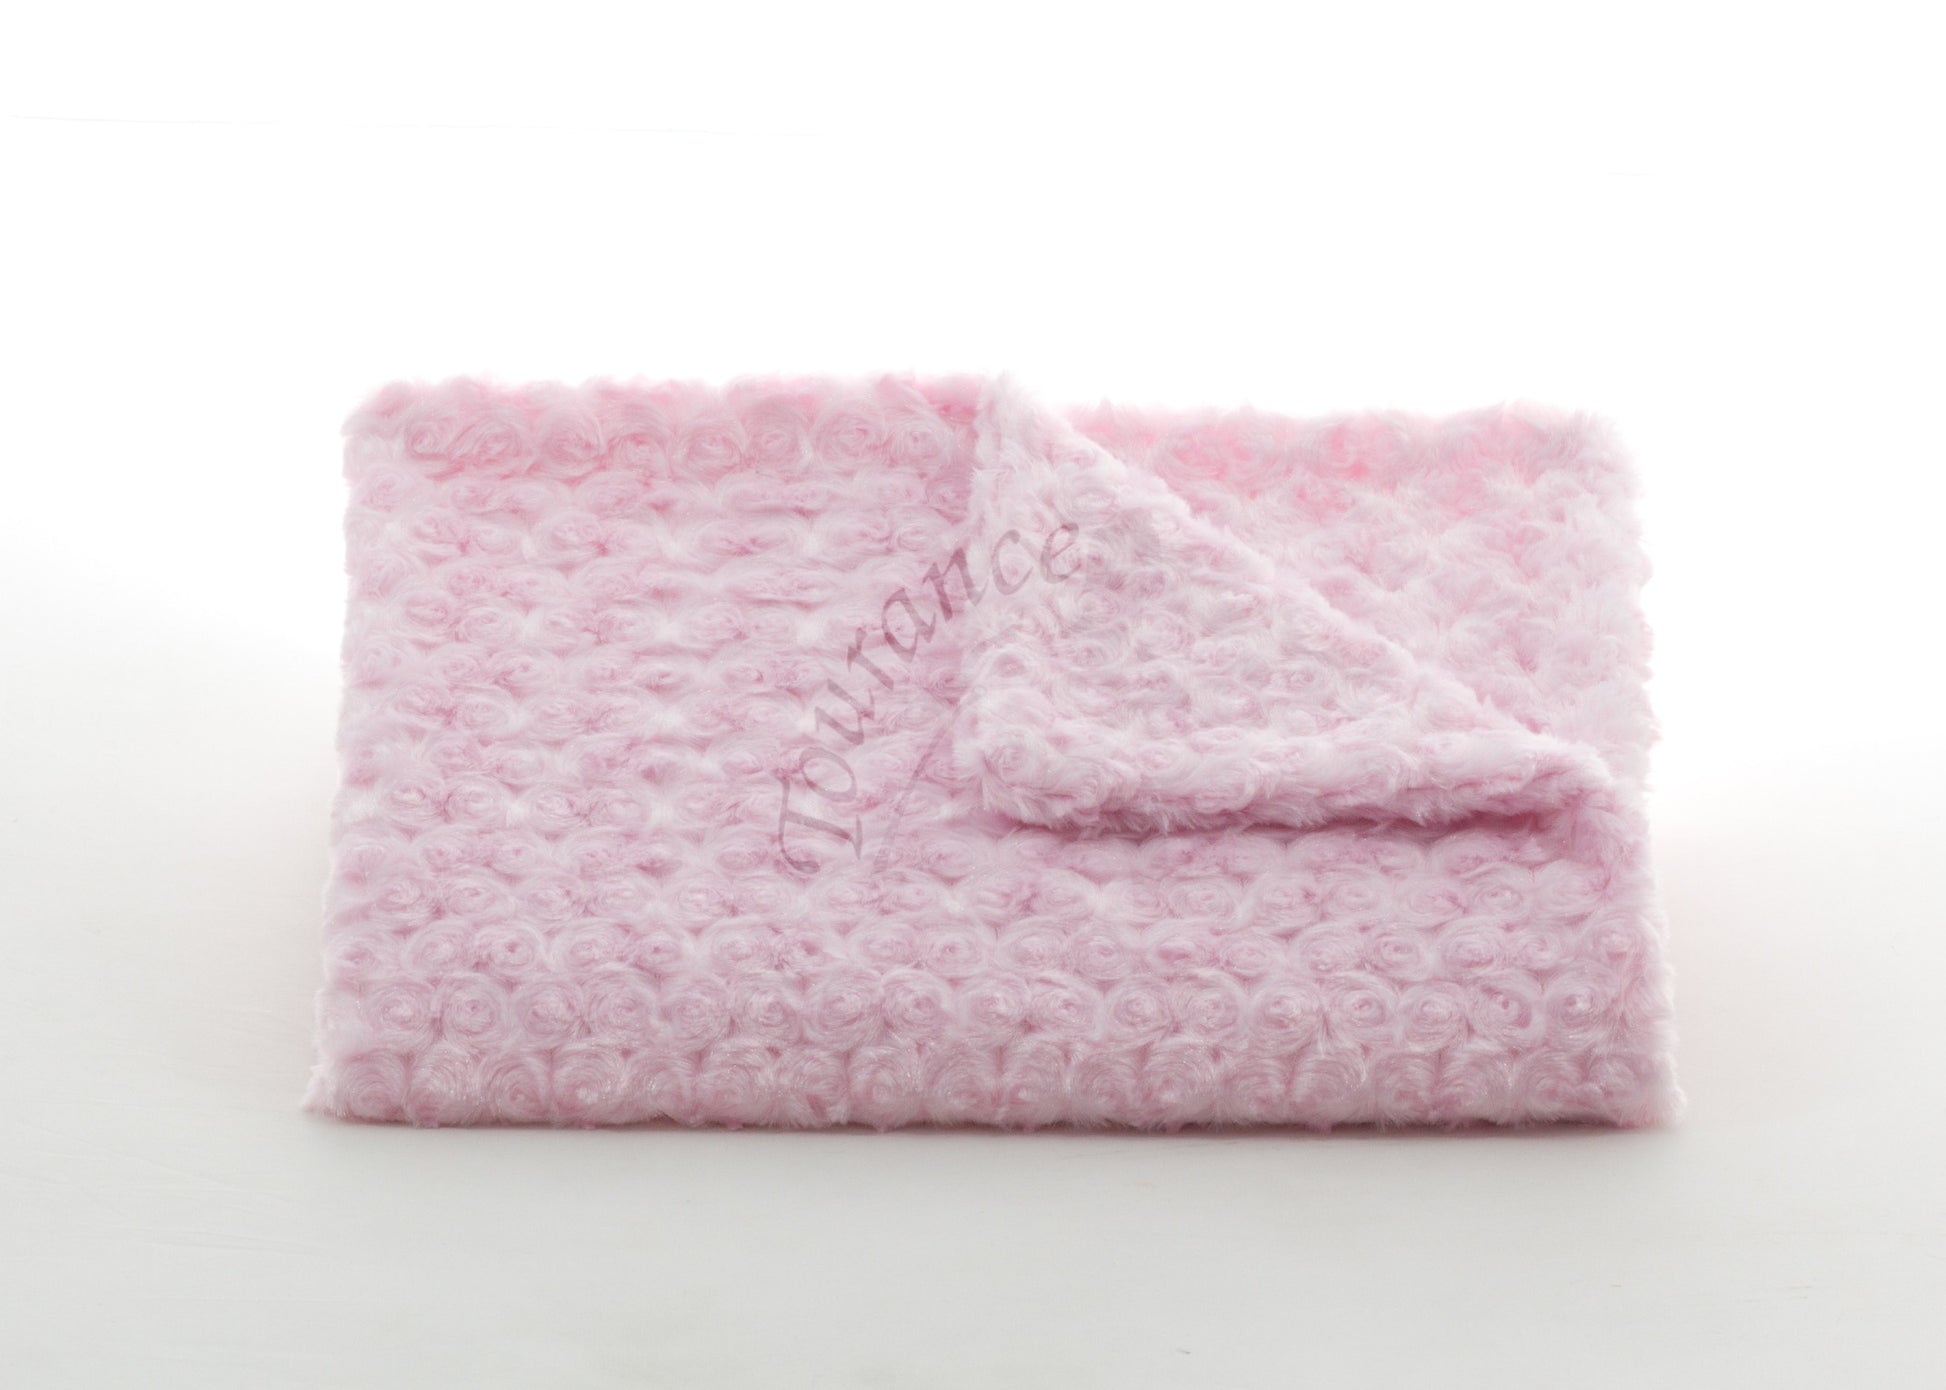 Rosebud Classic Baby Blanket in Pink with Tourance Watermark